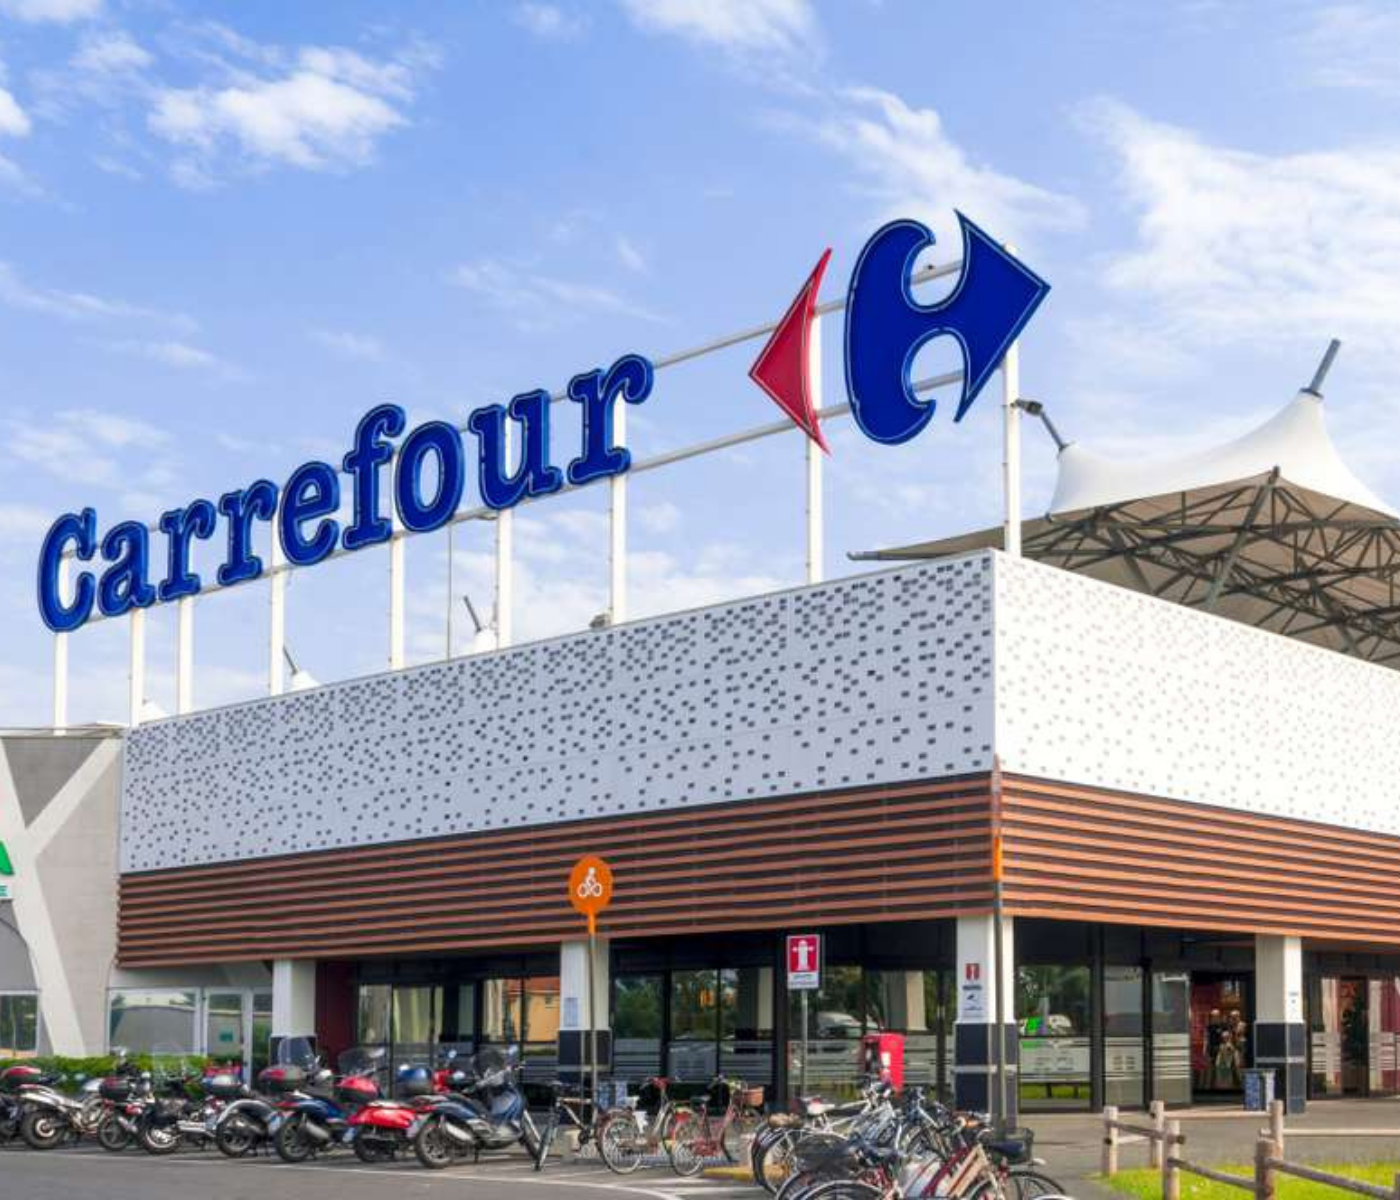 Carrefour Italy uses Woosmap to boost synergies between physical sales and e-commerce